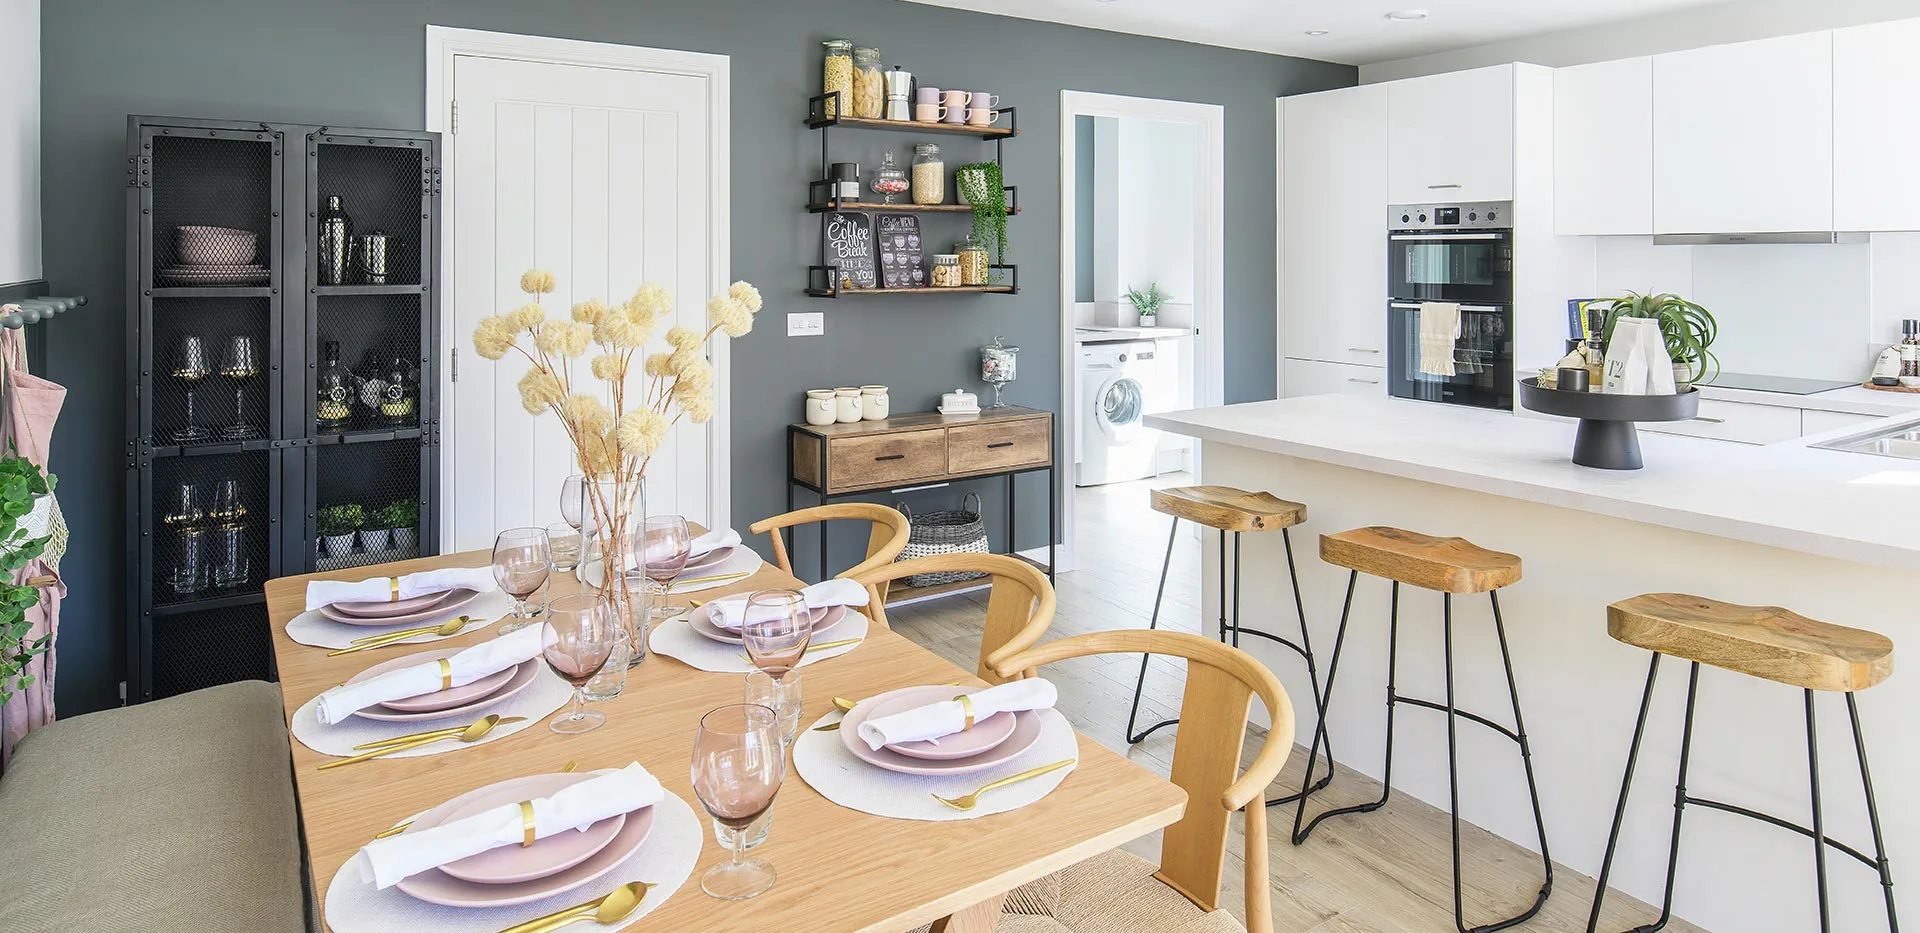 foal-hurst-green-3-bedroom-showhome-kitchen-dining-09092022